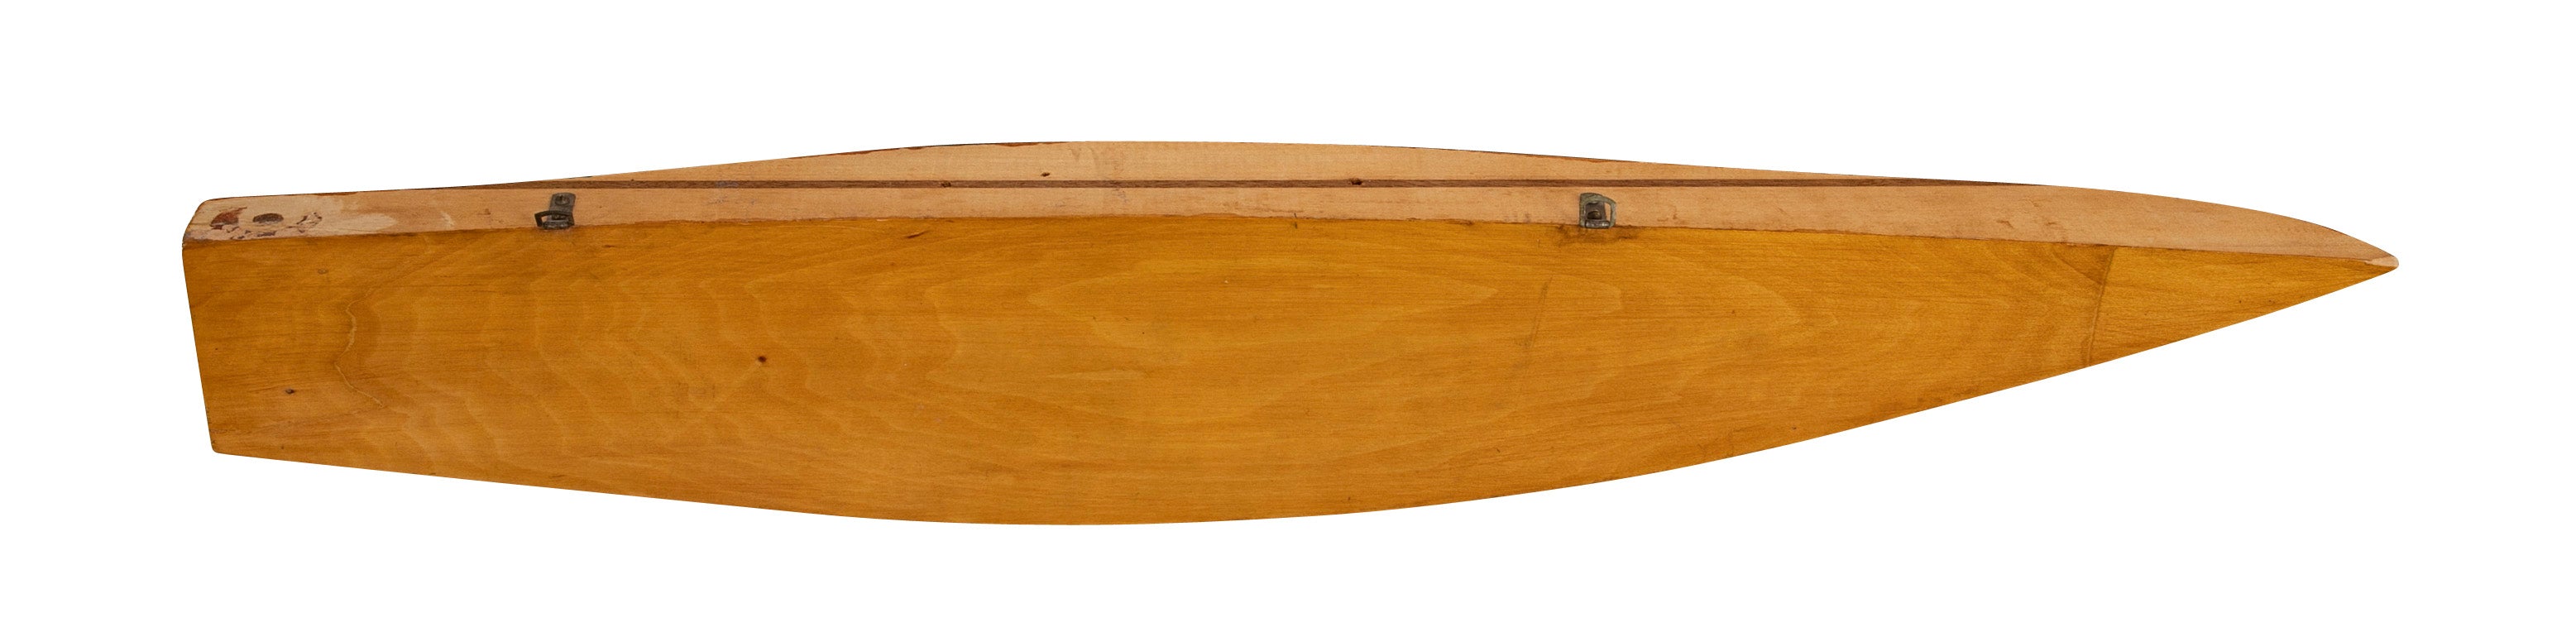 Half Hull Carved by Malcolm M. Crosby of an 1892 Yacht